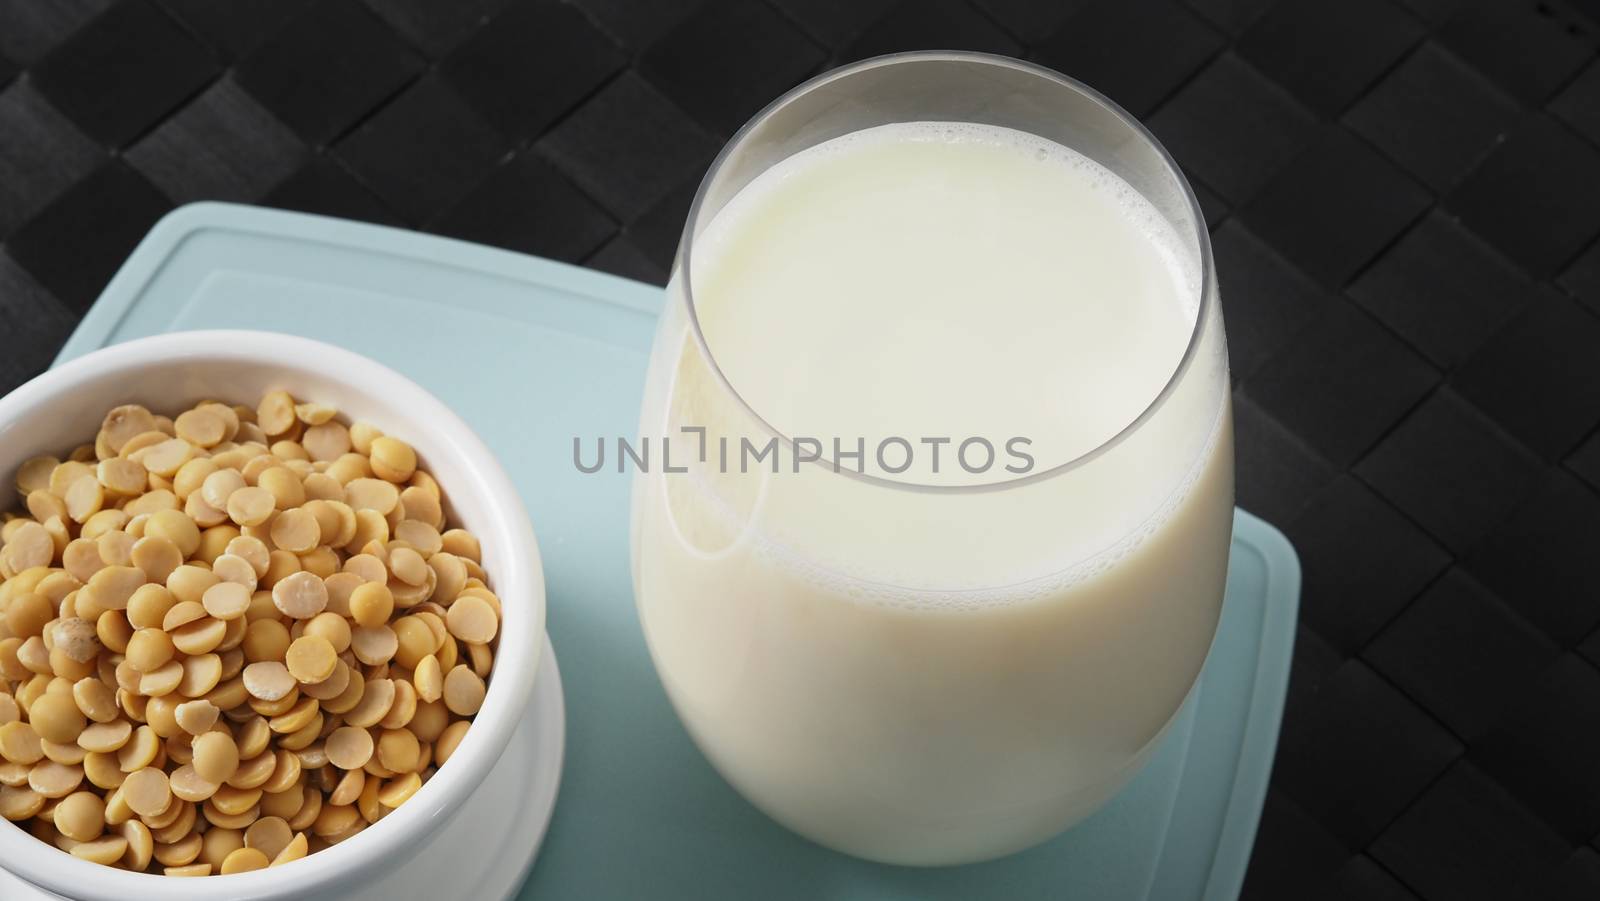 Home made healthy drink soy milk with no sugar added in a glass. by gnepphoto